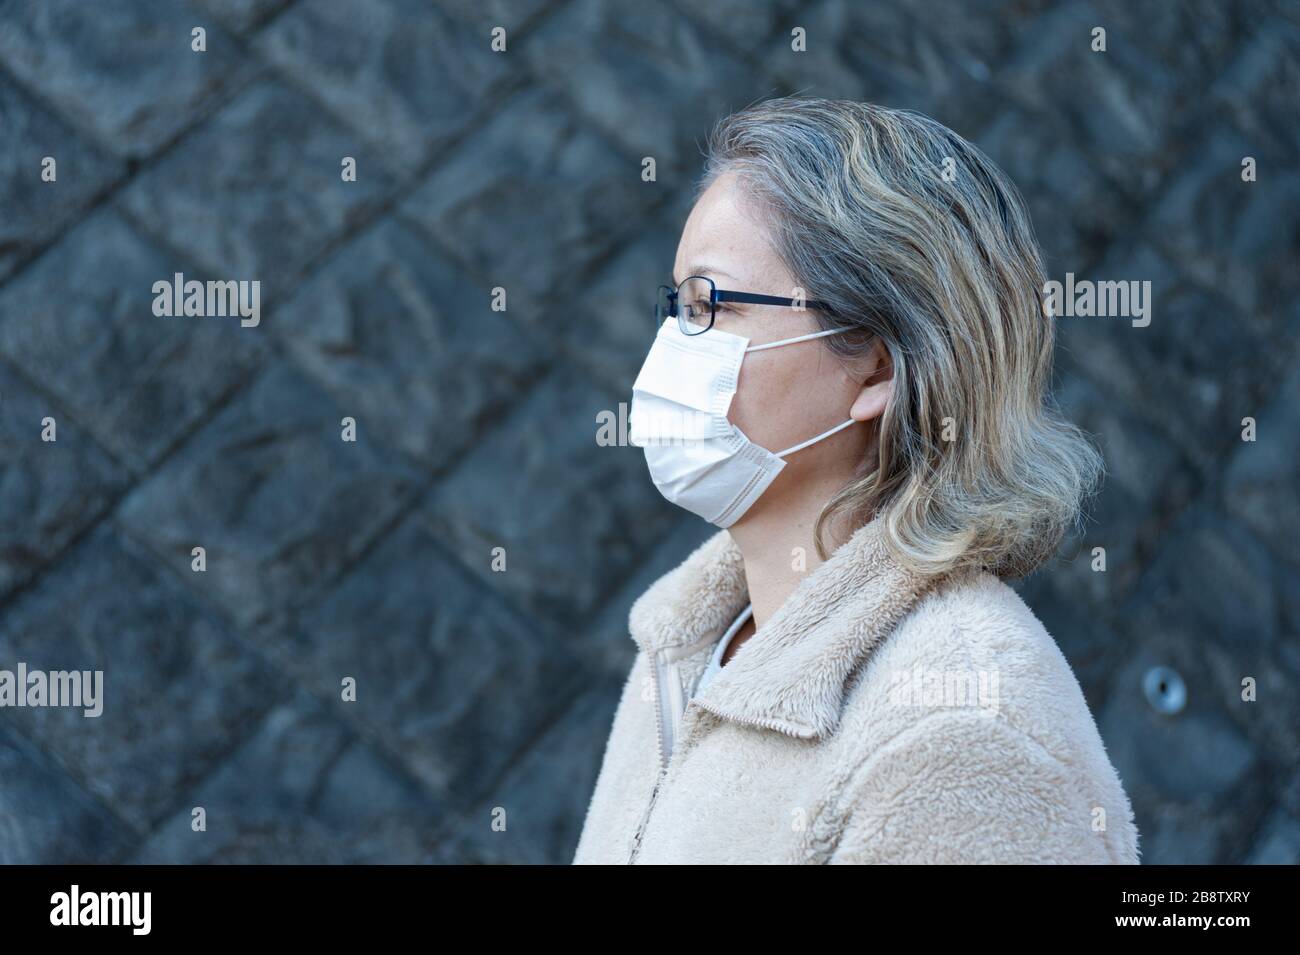 Woman 40-49 year old outdoors wearing glasses and white mask to protect against viruses, flu, hay fever and other diseases. Looking to the side. Stock Photo